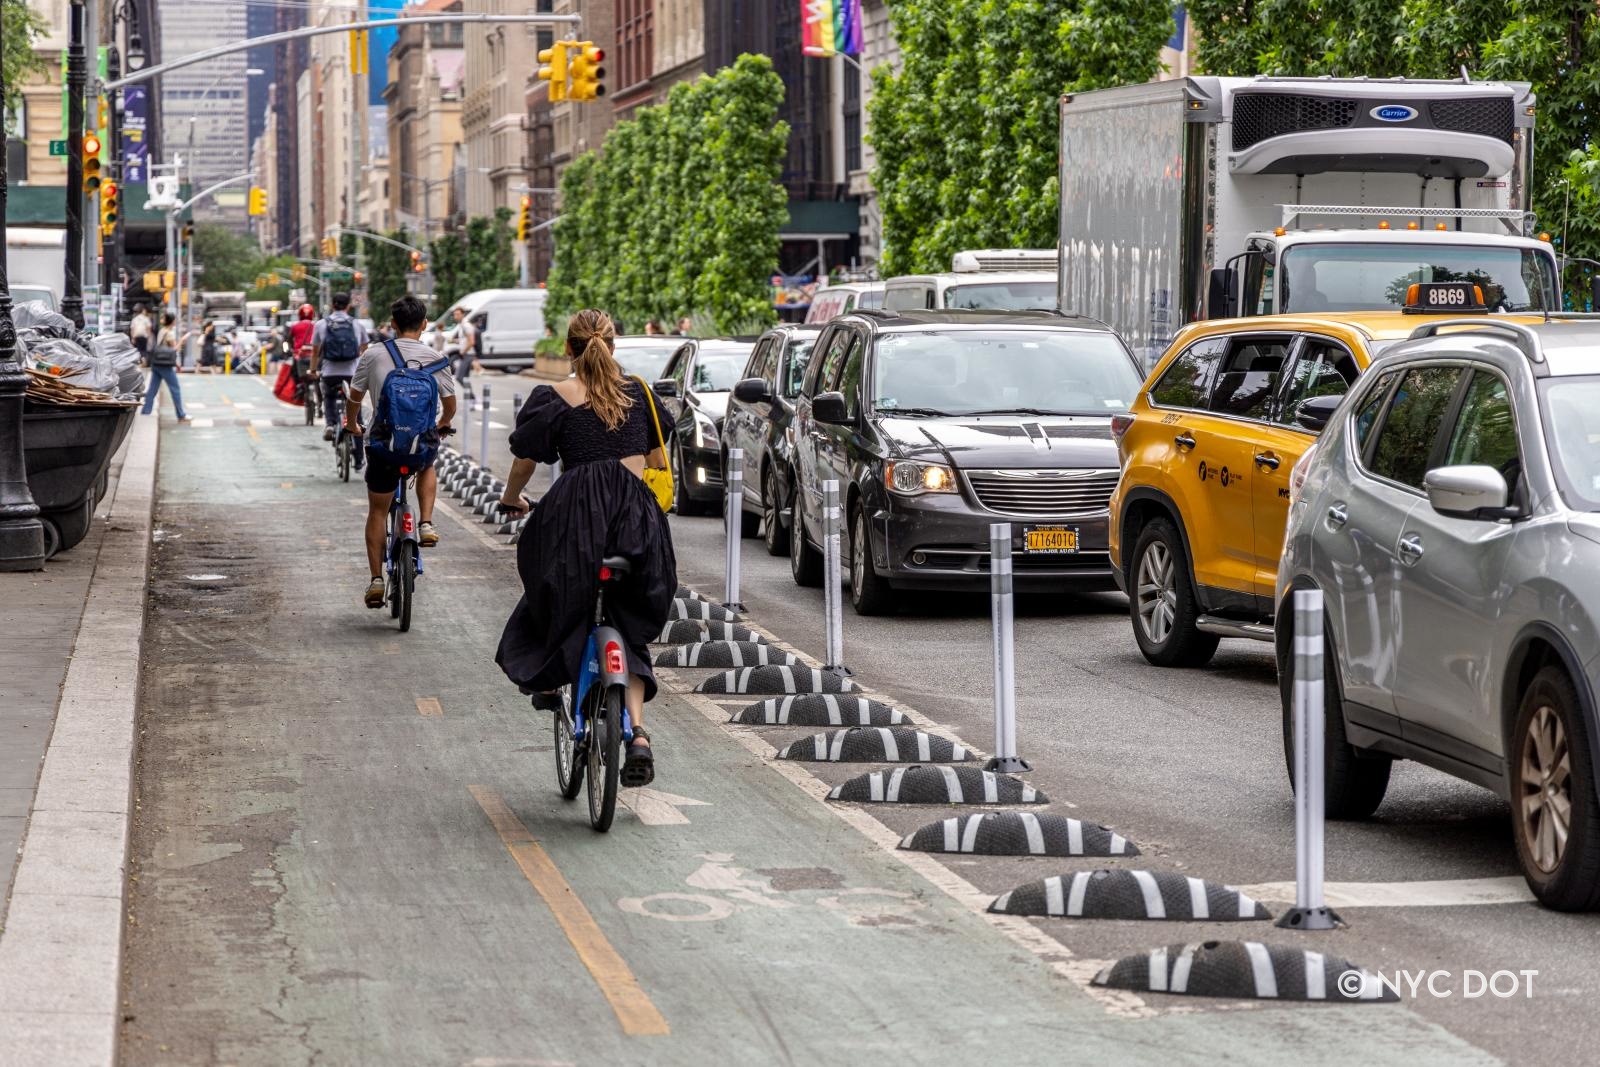 https://www1.nyc.gov/assets/visionzero/images/content/pages/betterbarriers.jpg